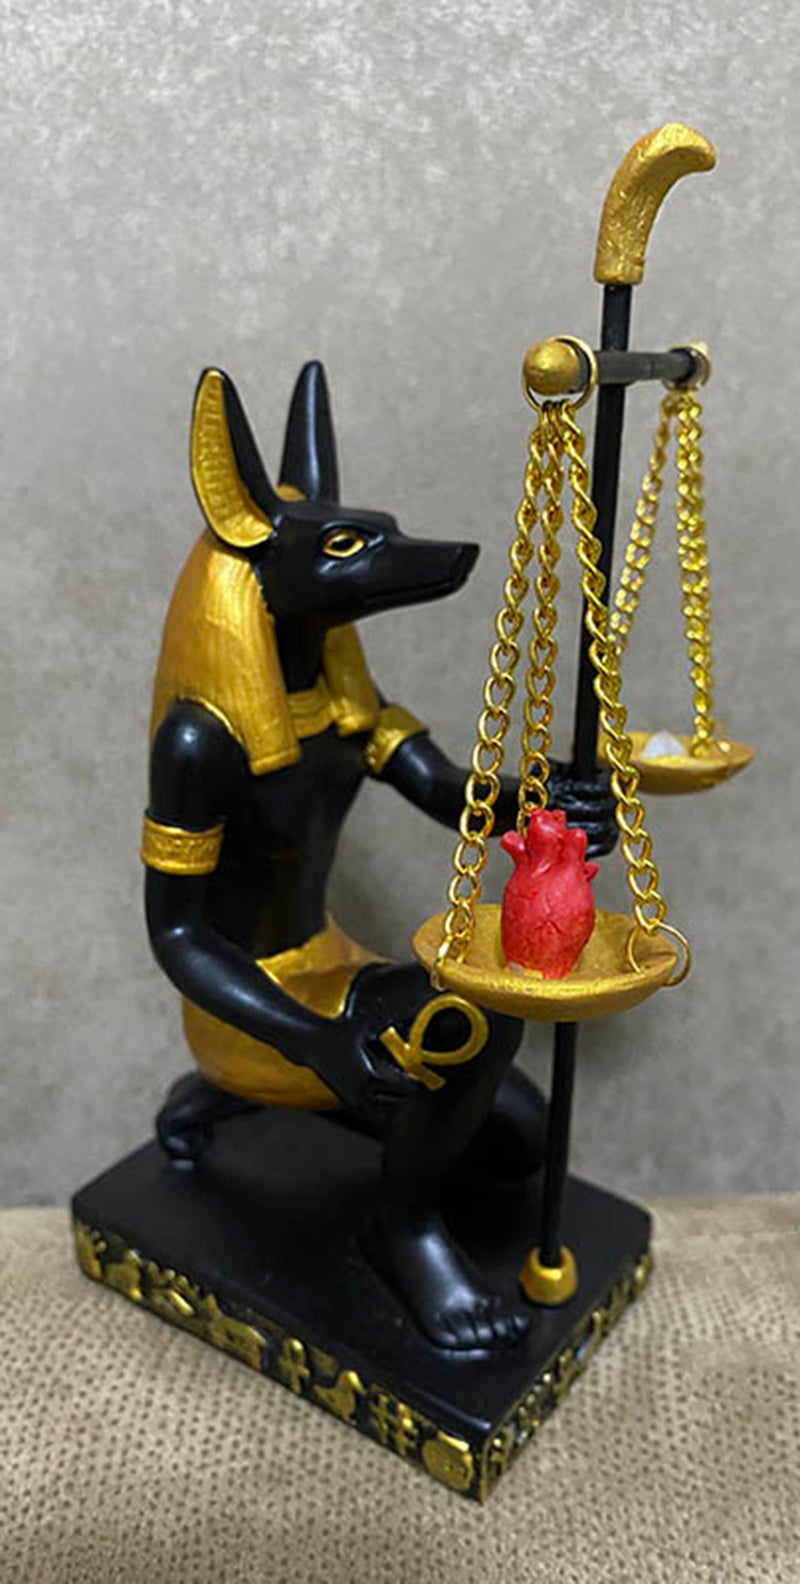 Small Size Ornaments Of Ancient Egyptian Gods